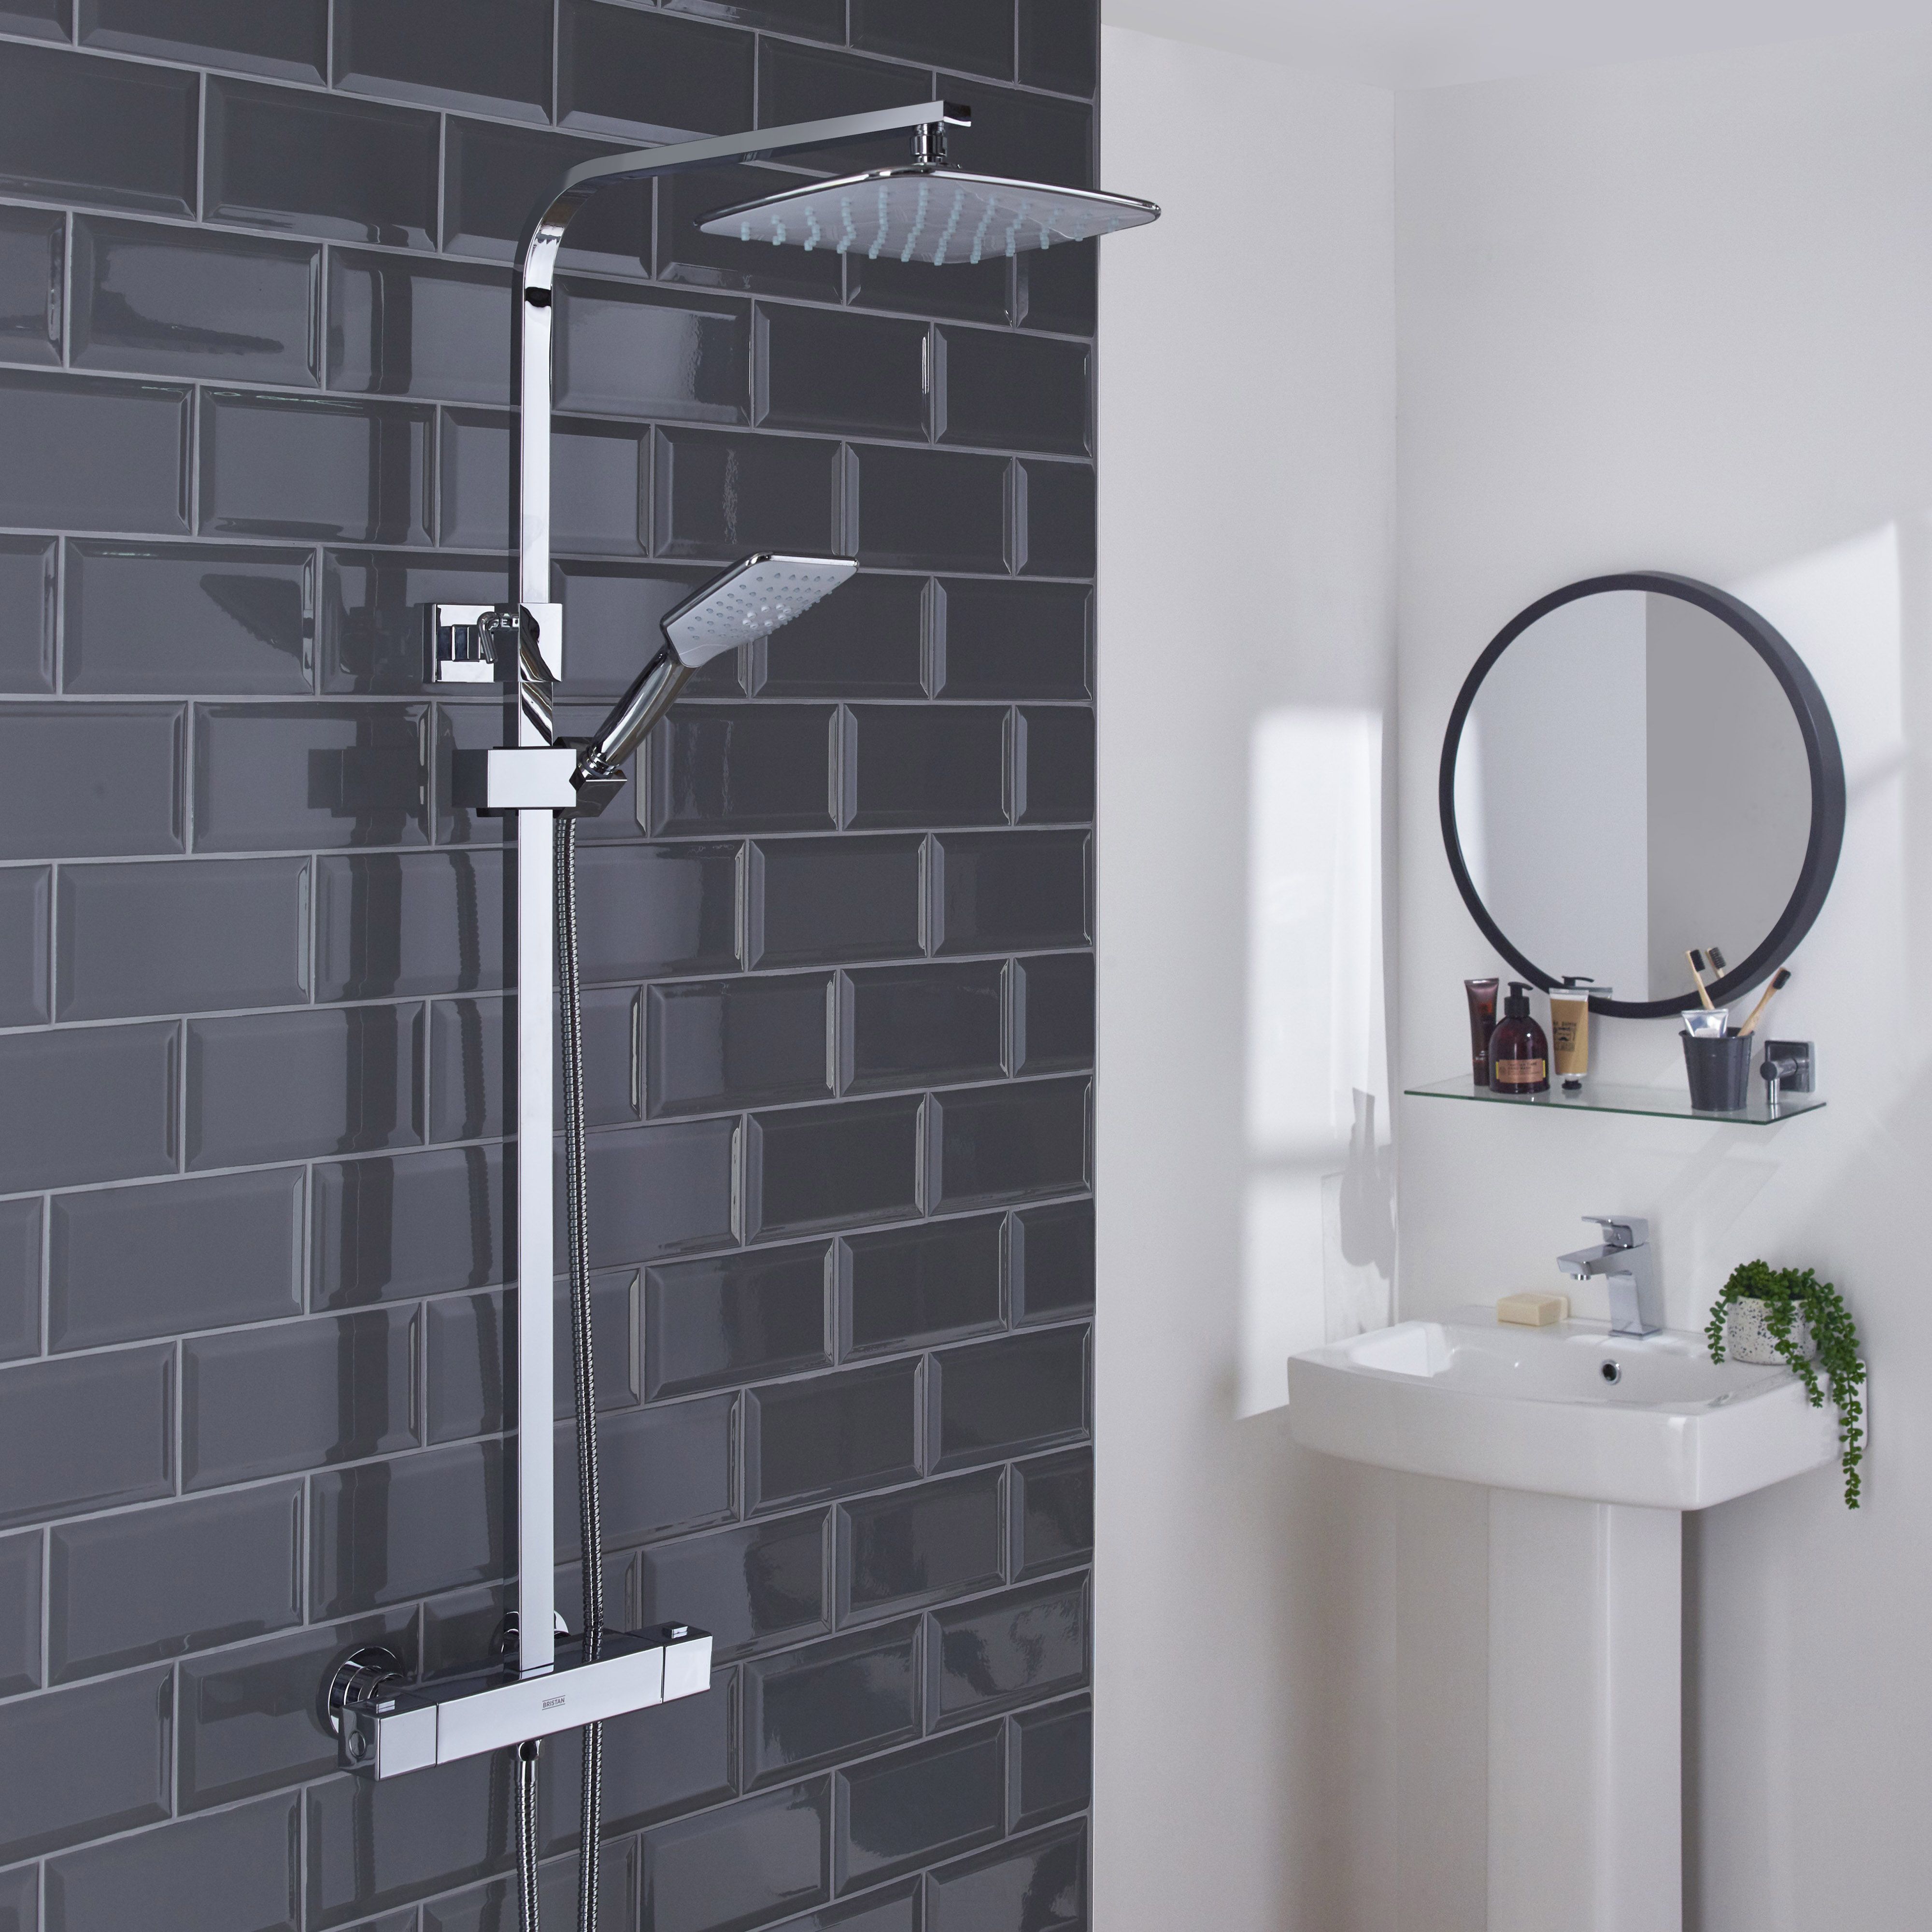 Bristan Noctis Gloss Chrome effect Wall-mounted Thermostatic Mixer Multi head shower